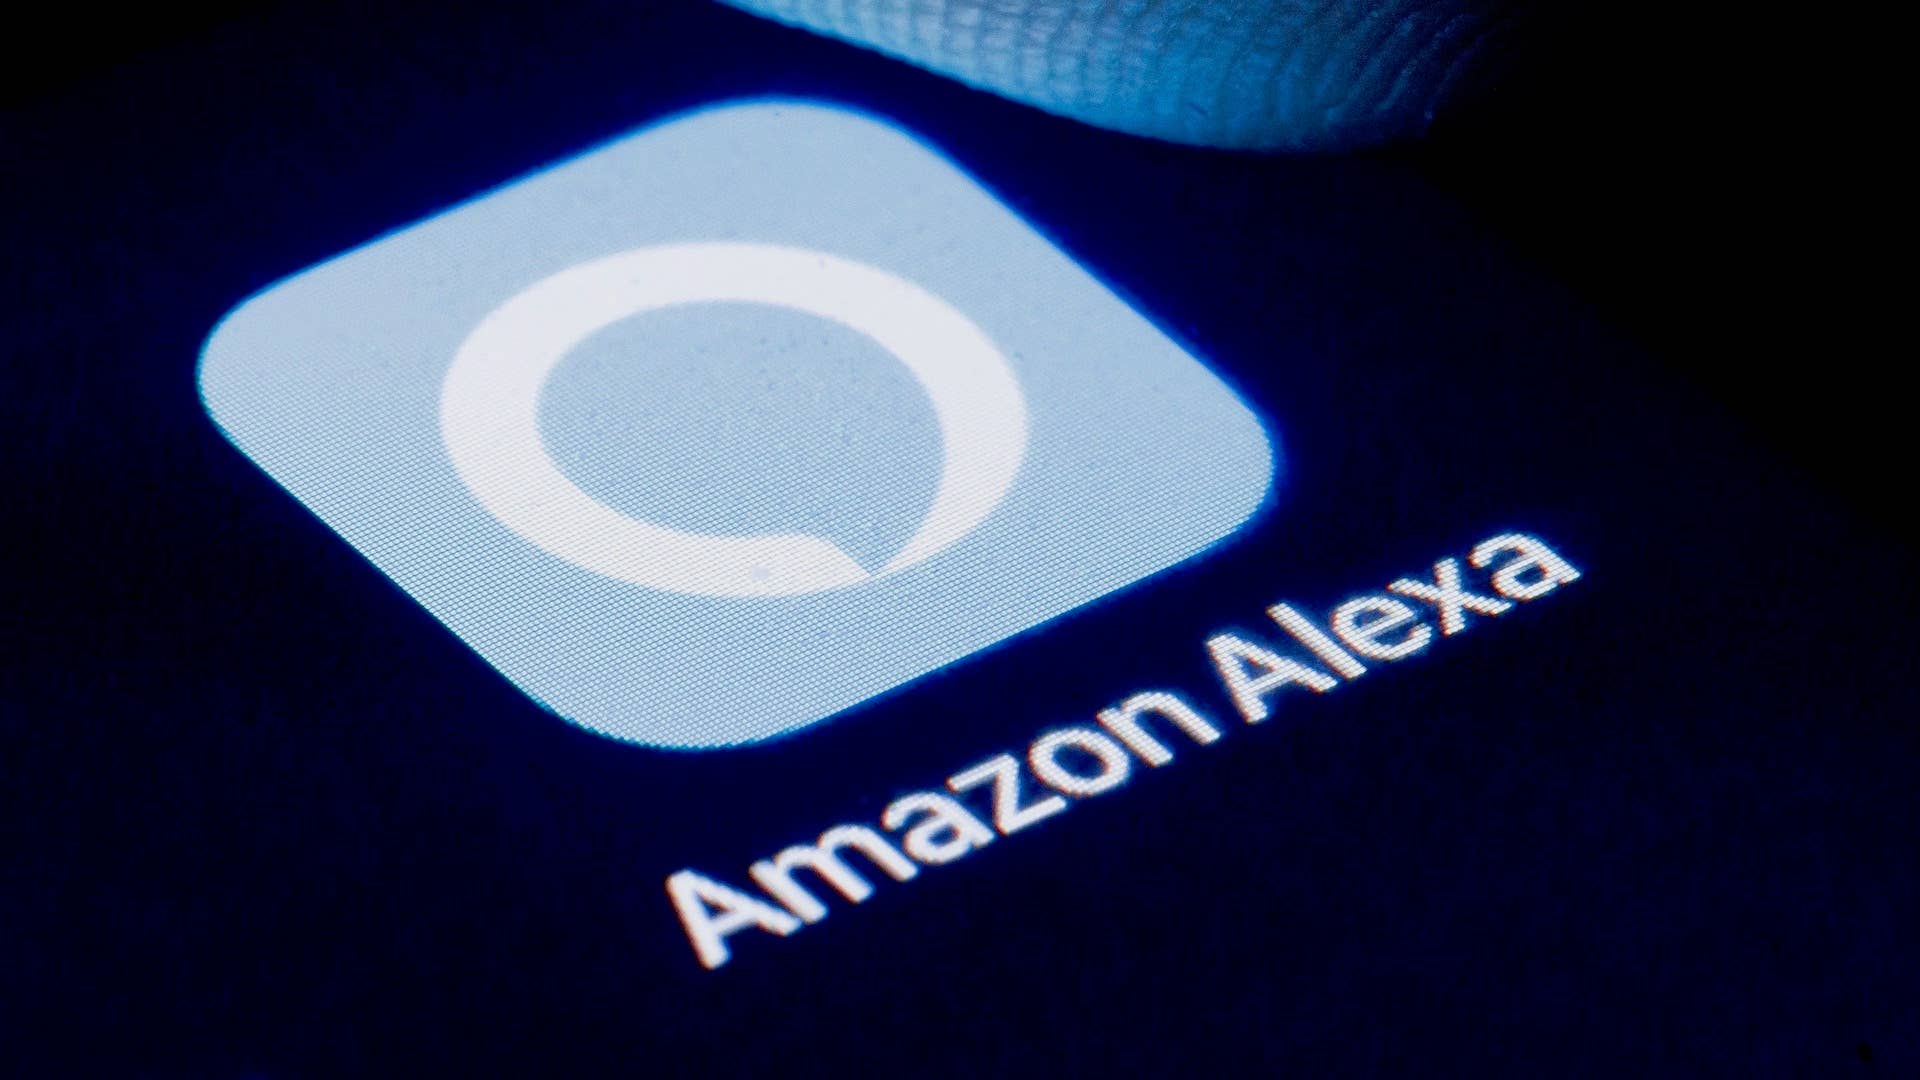 The logo of the voice assistant Amazon Alexa is shown on the display